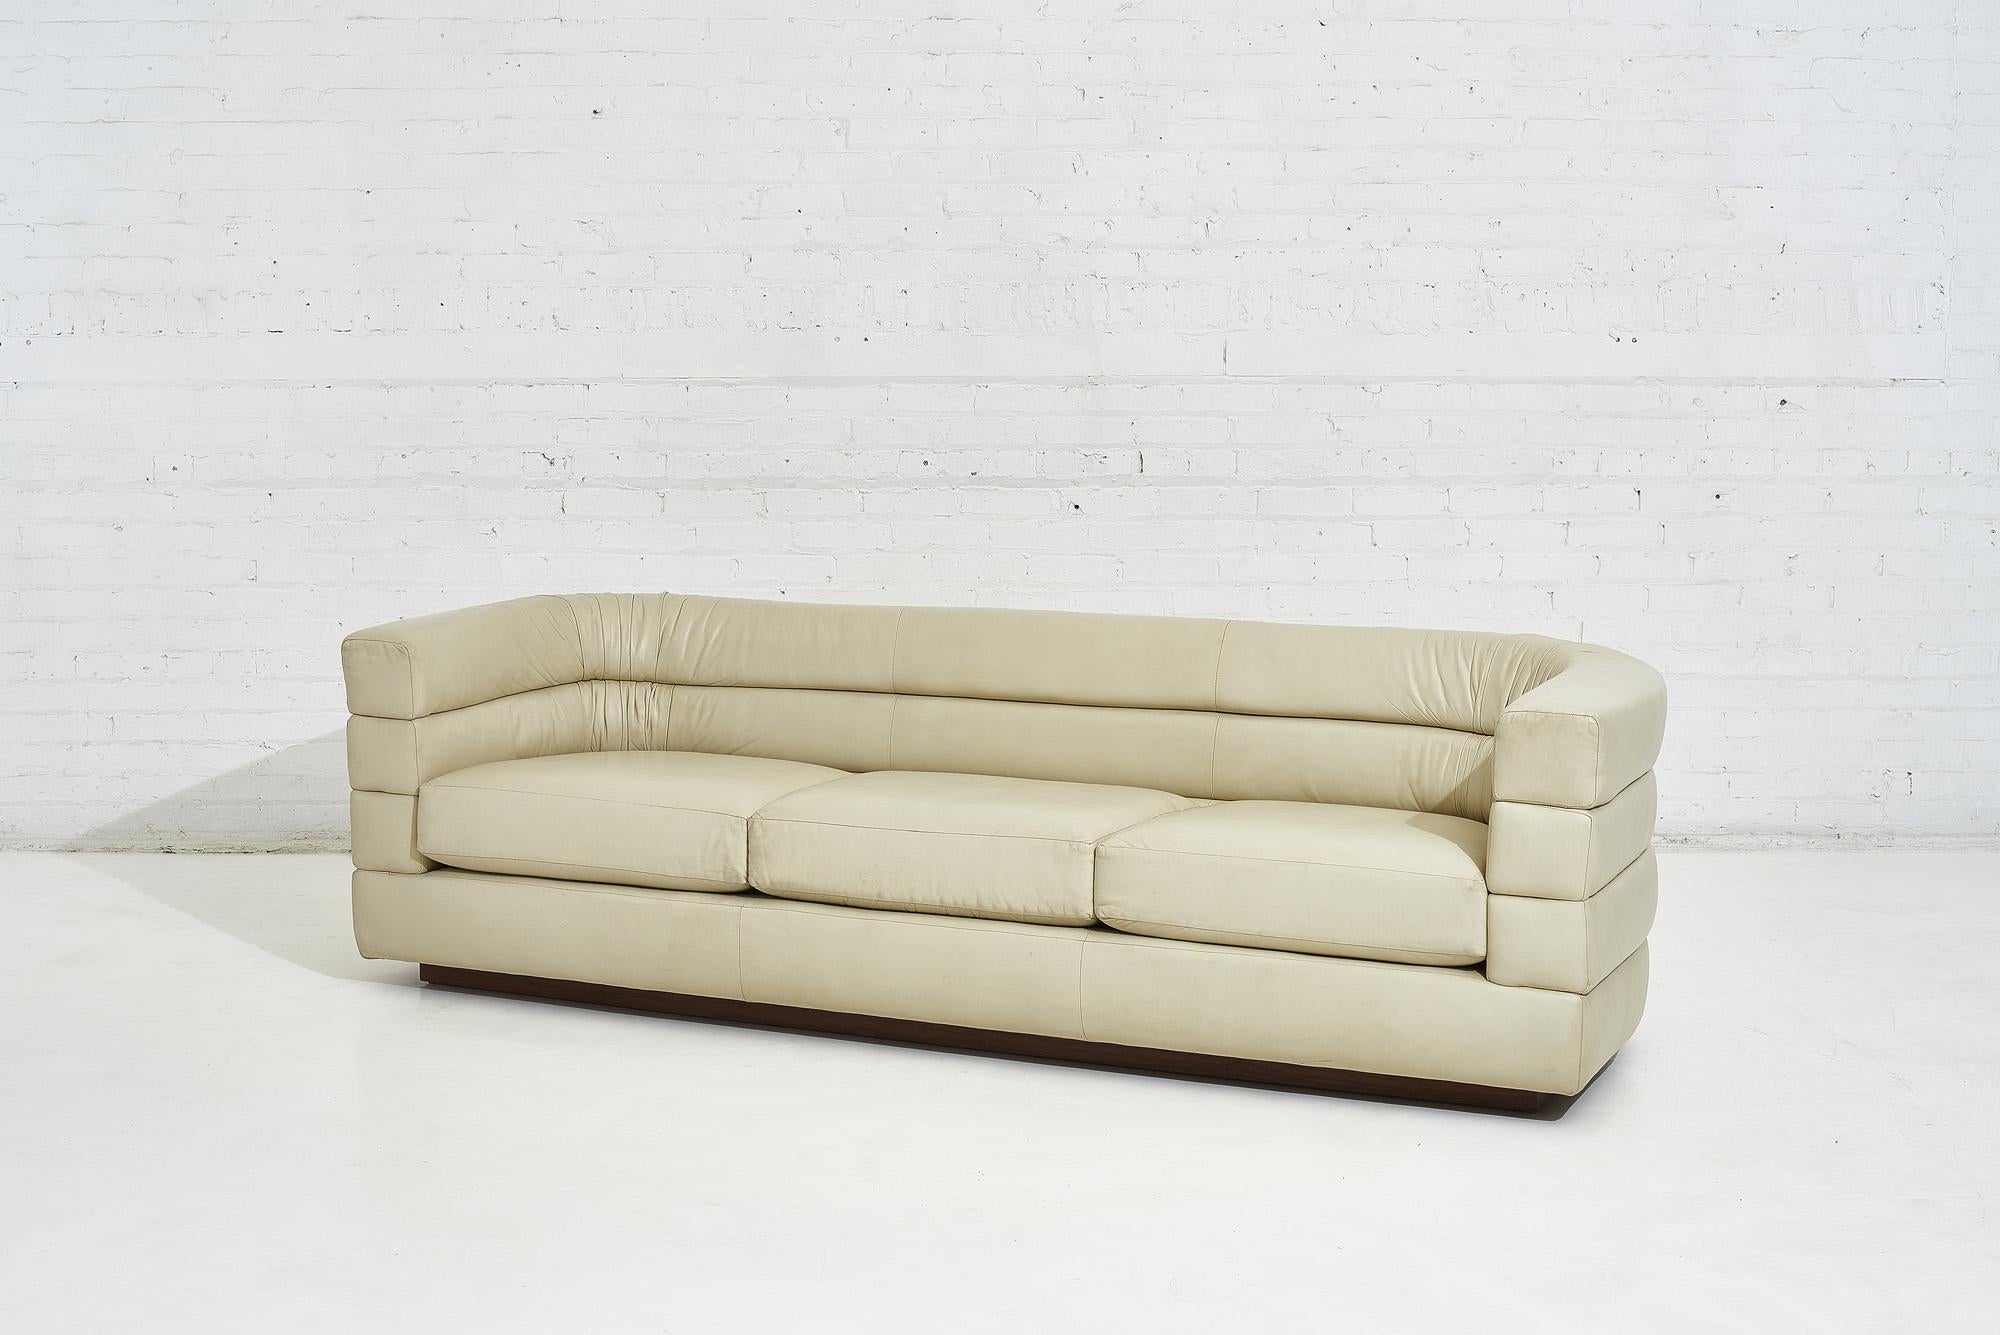 Modern Channel Stacked Leather Sofa by Interior Crafts, 1970’s